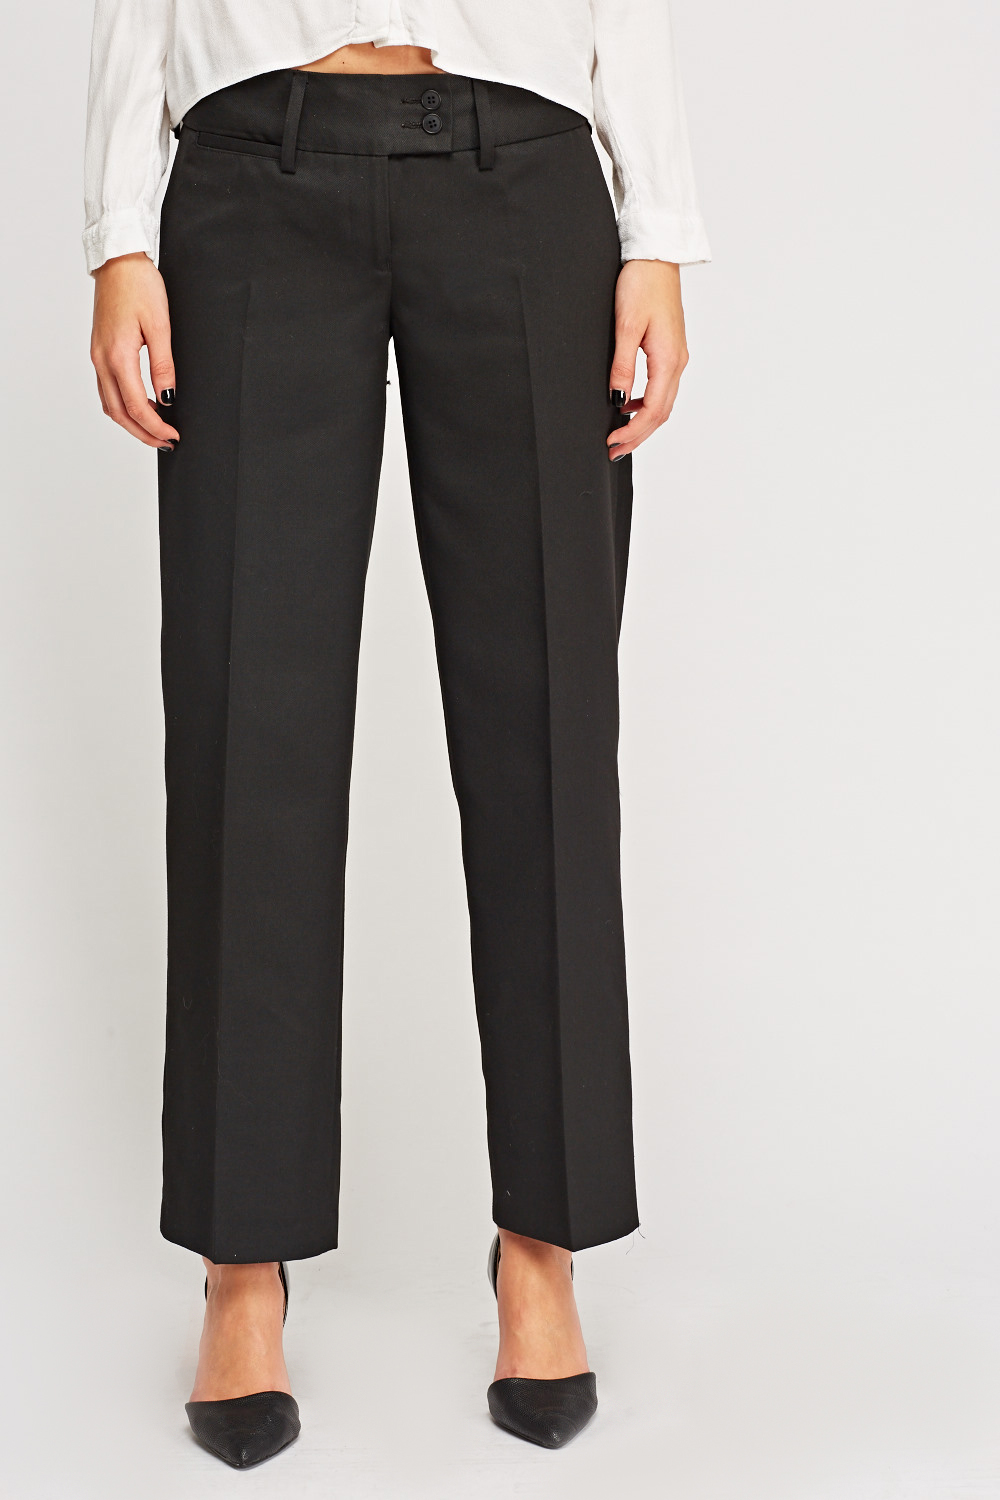 Black Formal Tapered Trousers - Just $7